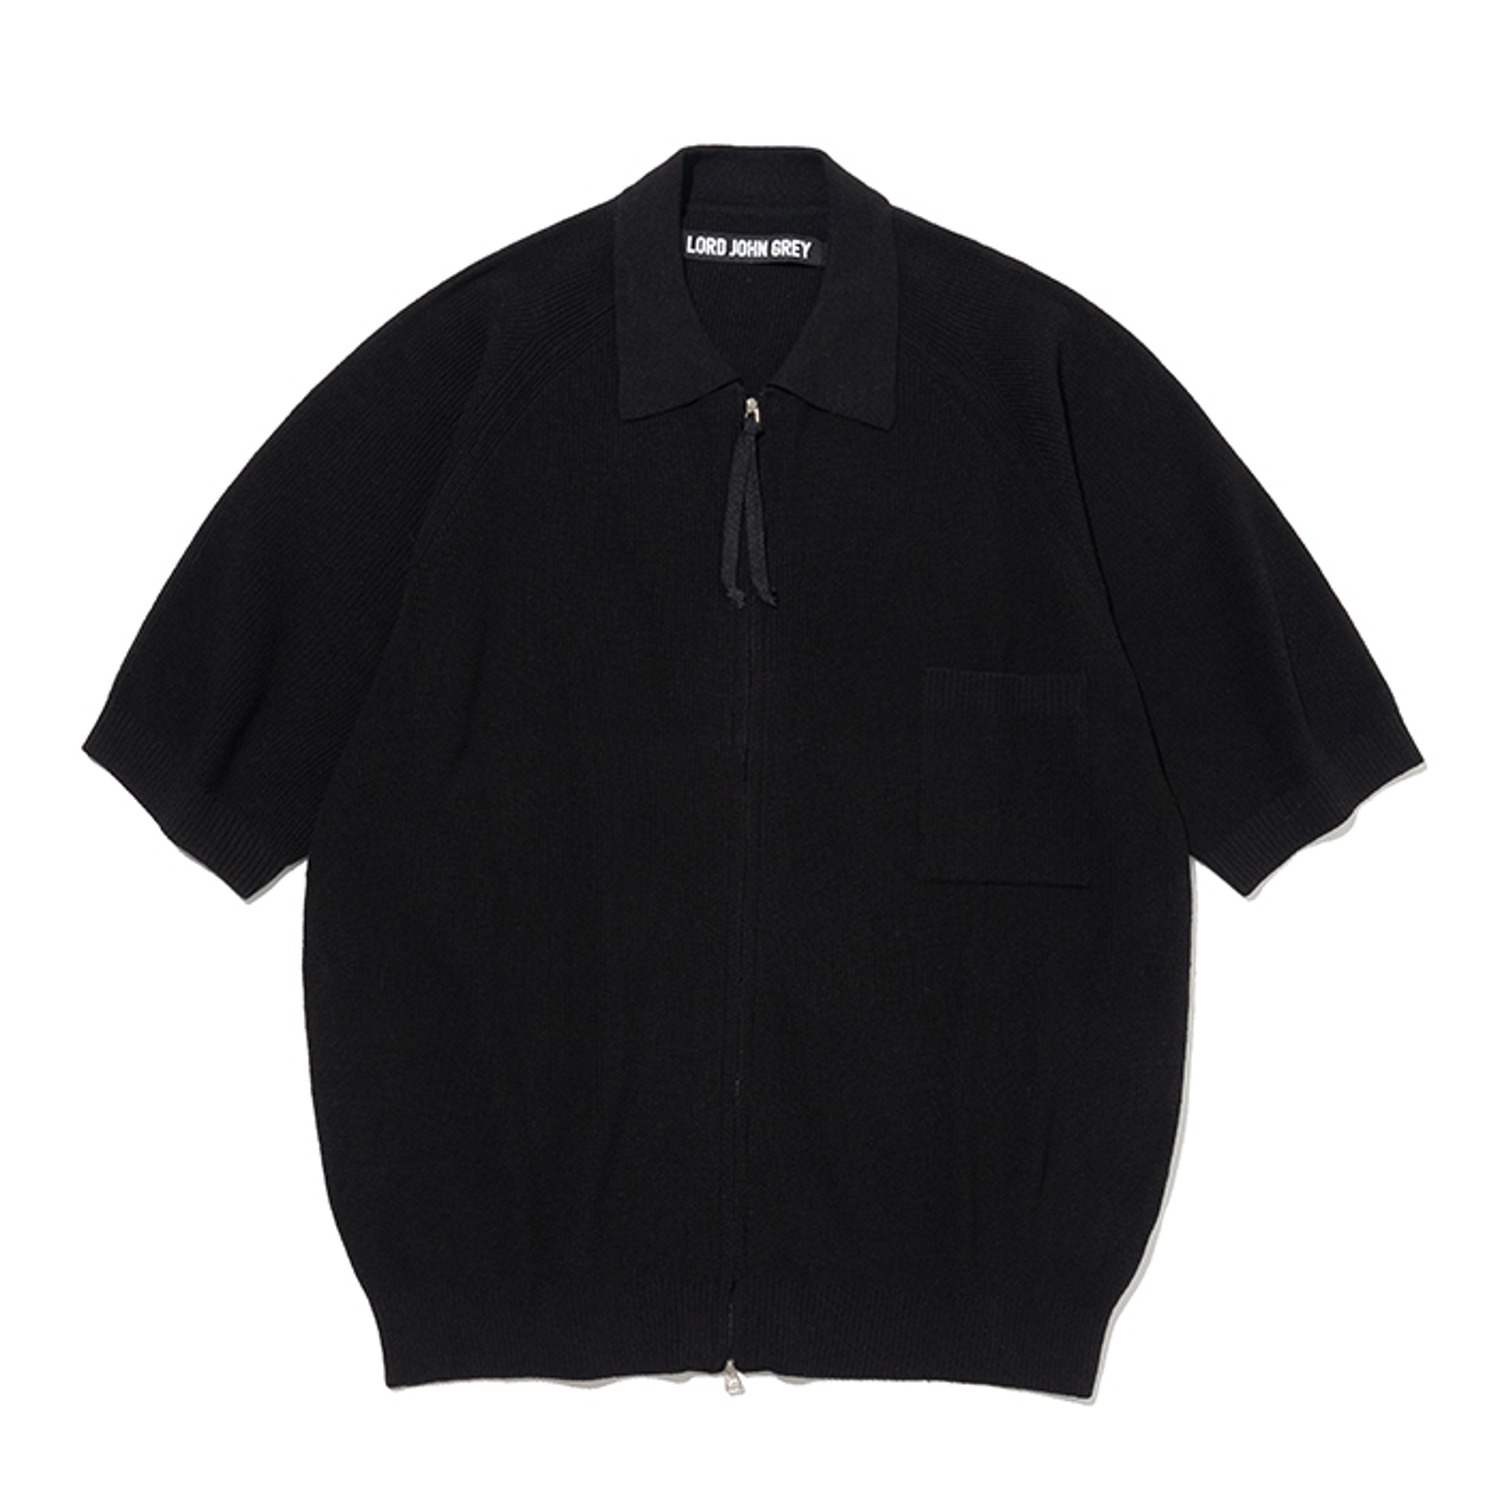 two way zip up short sleeve knit black